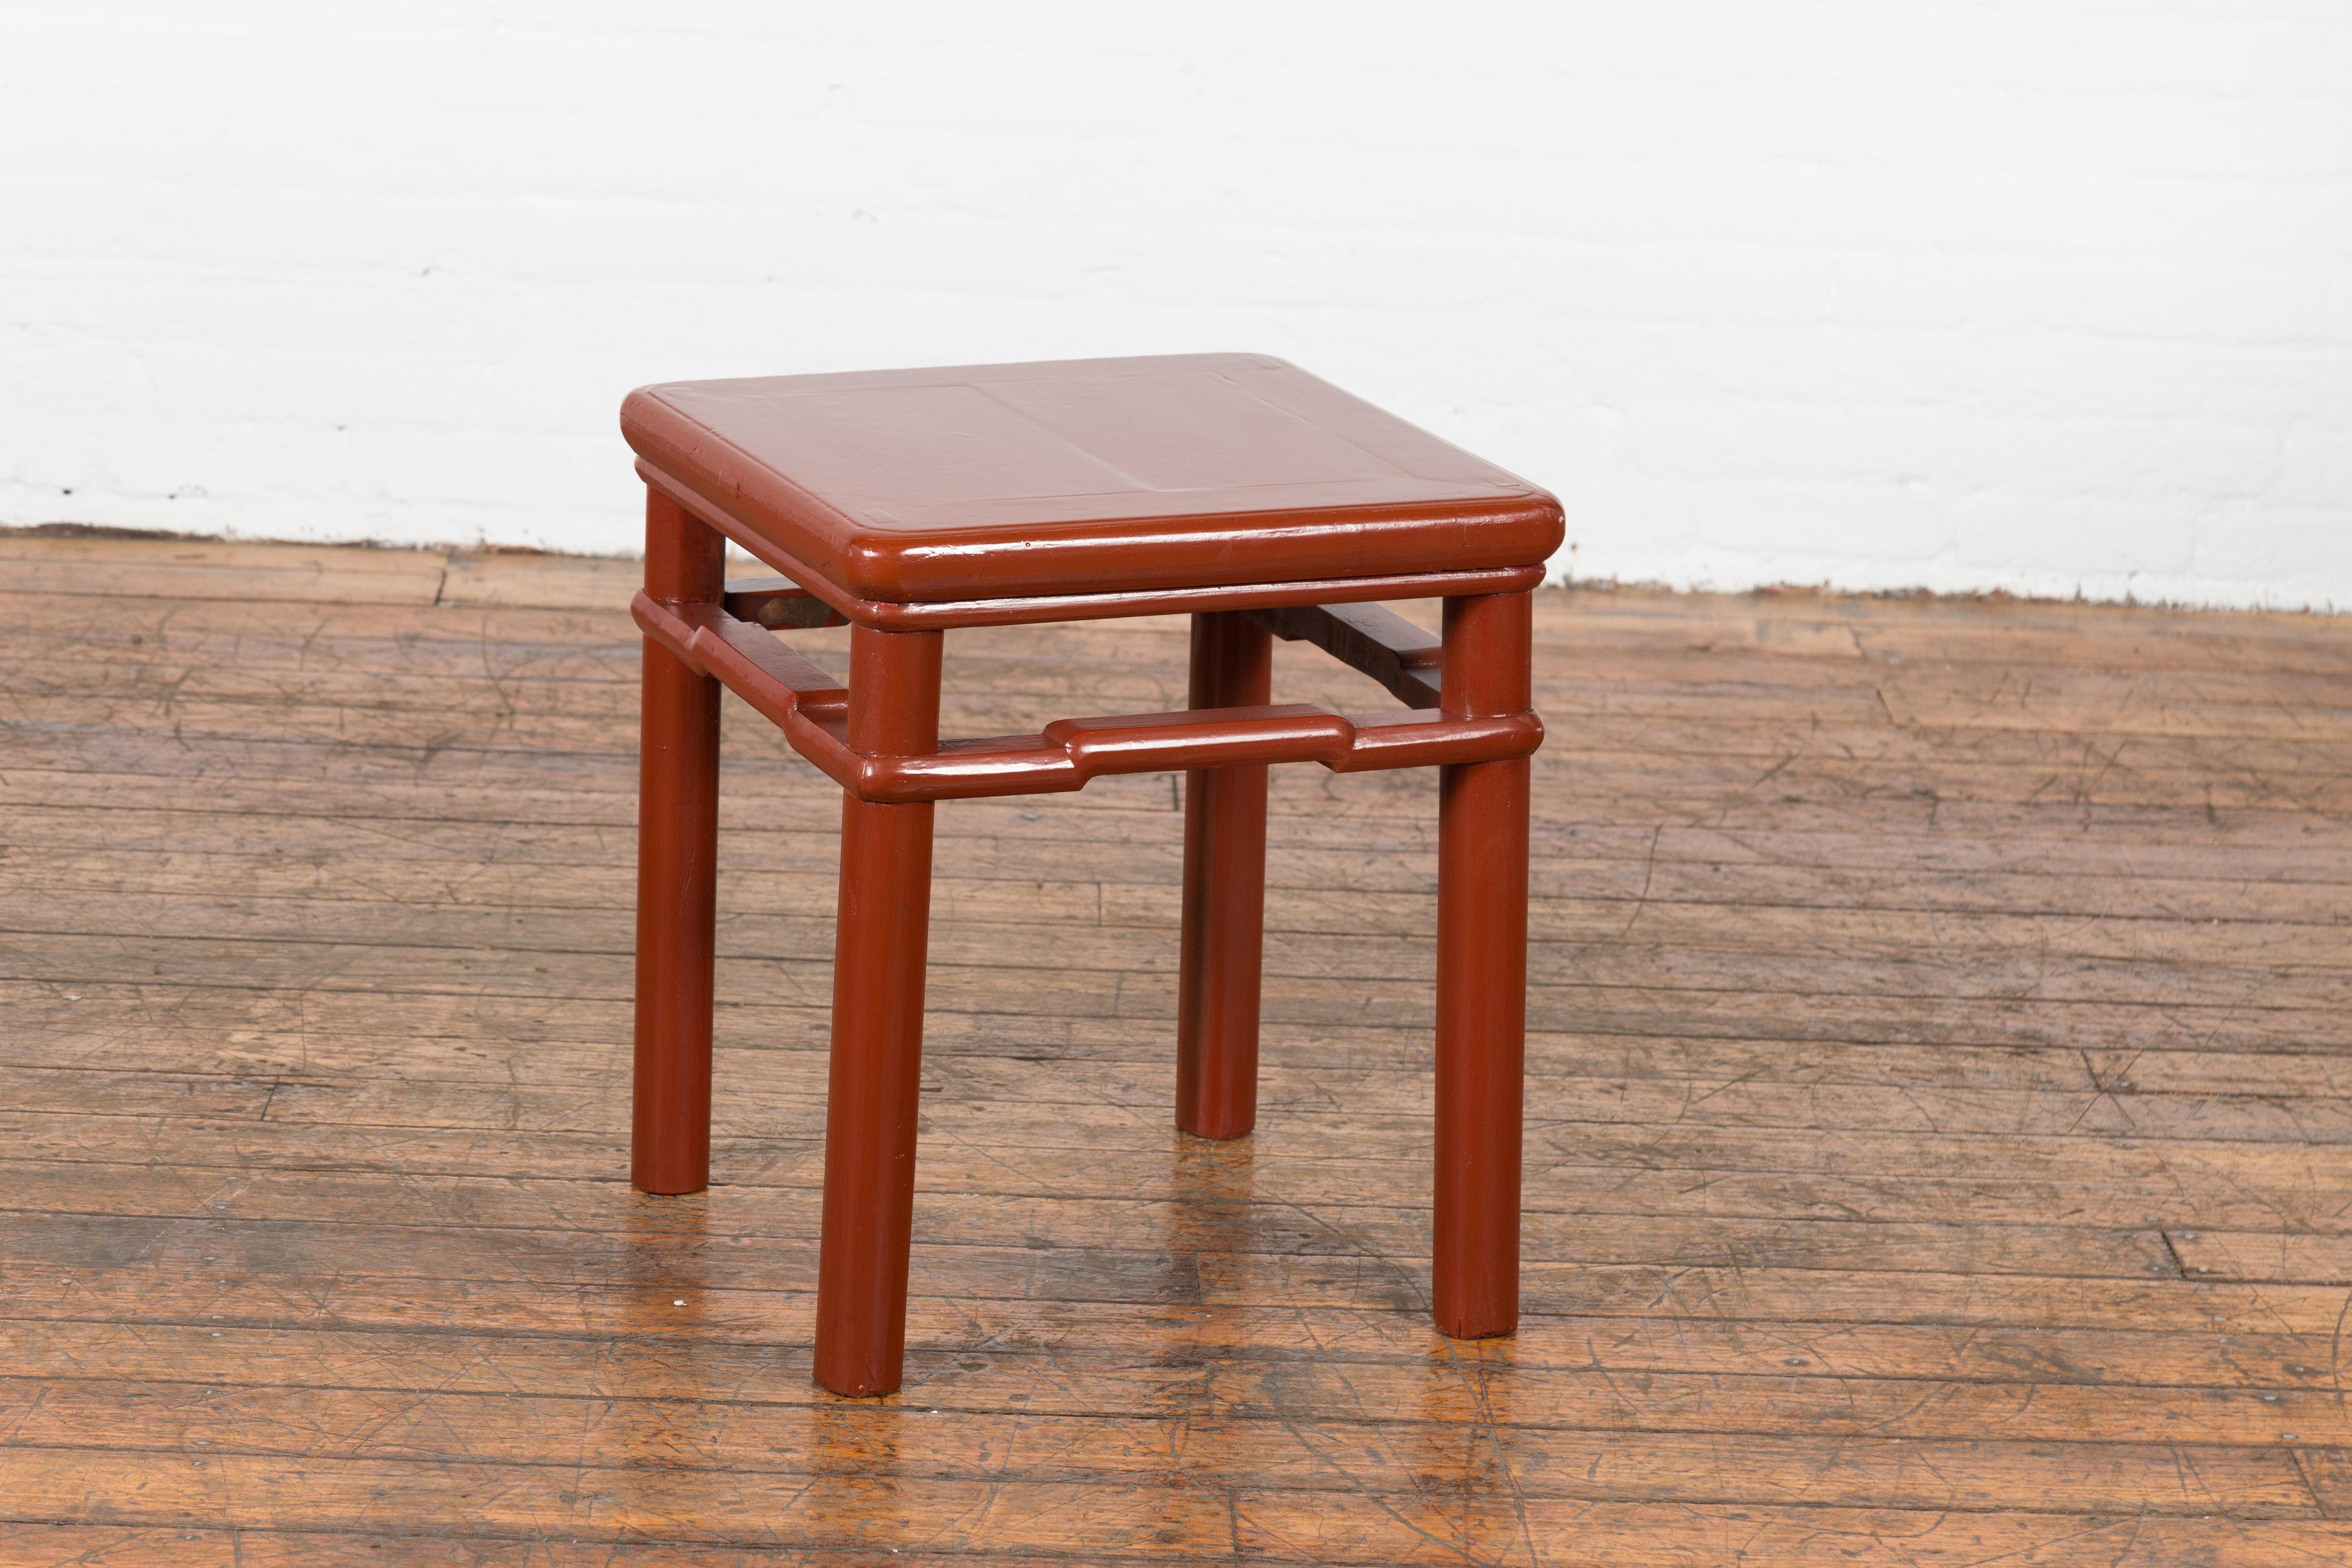 Chinese 1900s Qing Dynasty Red Lacquer Stool or Table with Humpback Stretchers For Sale 7